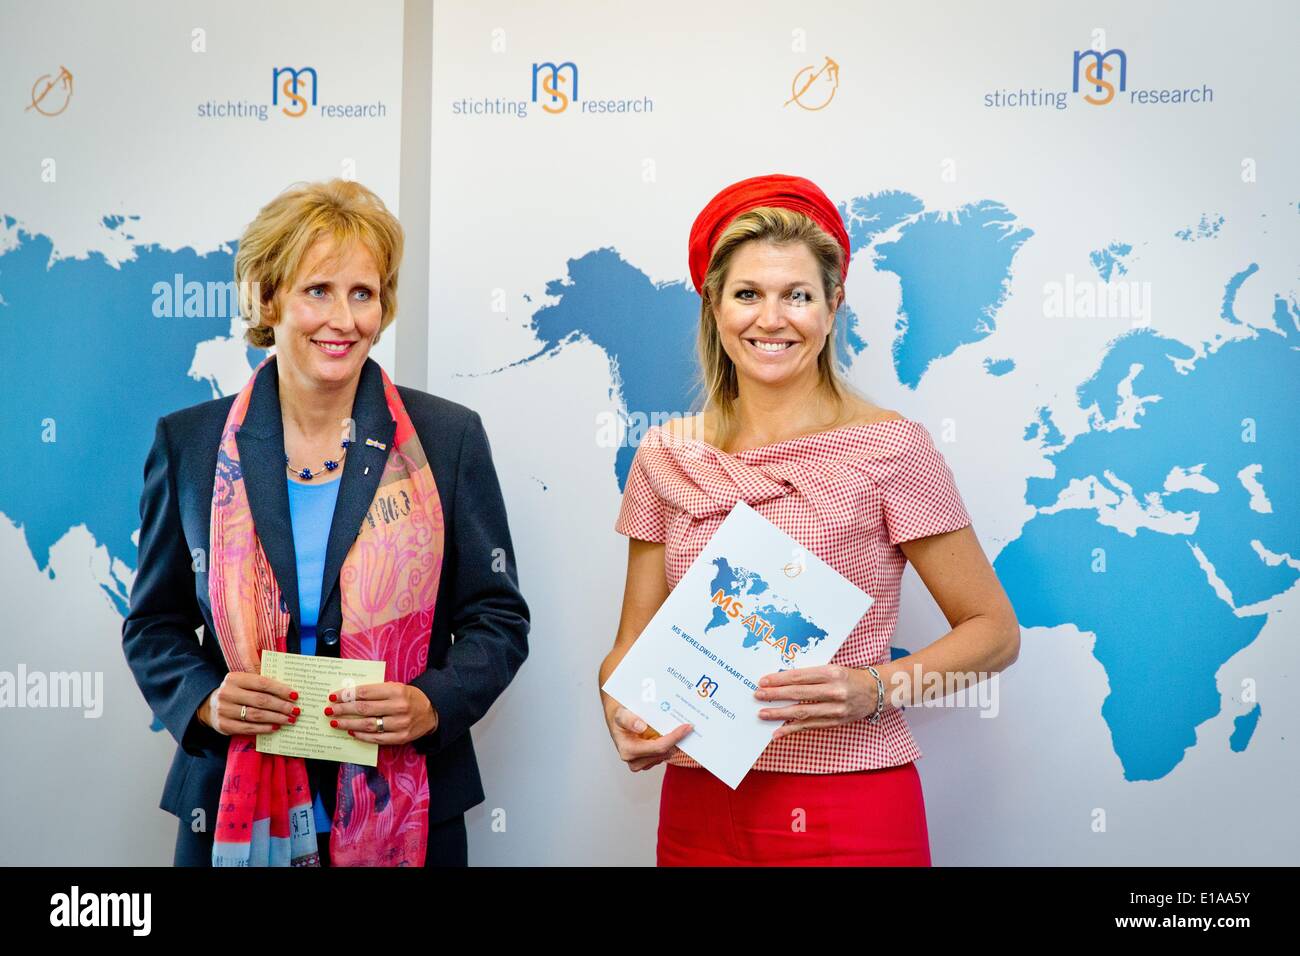 Voorschoten, The Netherlands. 28th May, 2014. Queen Maxima (R) visits foundation MS Research at World MS Day in Voorschoten, The Netherlands, 28 May 2014. The Queen received the first Dutch version of the International MS (multiple sclerosis) Atlas. Photo: Patrick van Katwijk/NO WIRE SERVICE/dpa/Alamy Live News Stock Photo